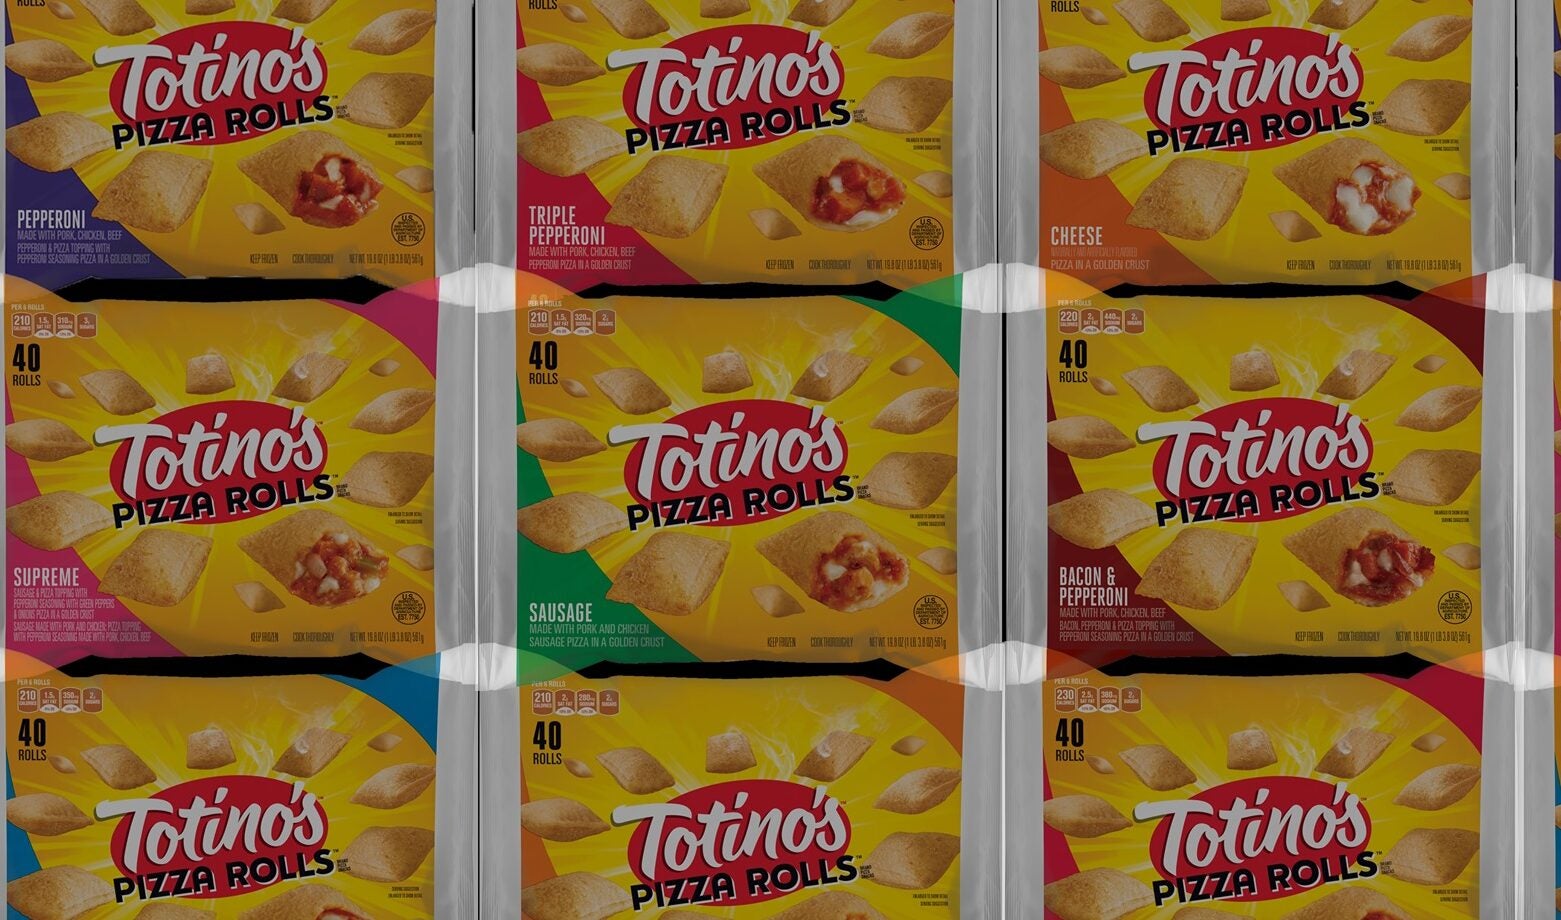 General Mills invests $100m in Totino's pizza factory - Just Food